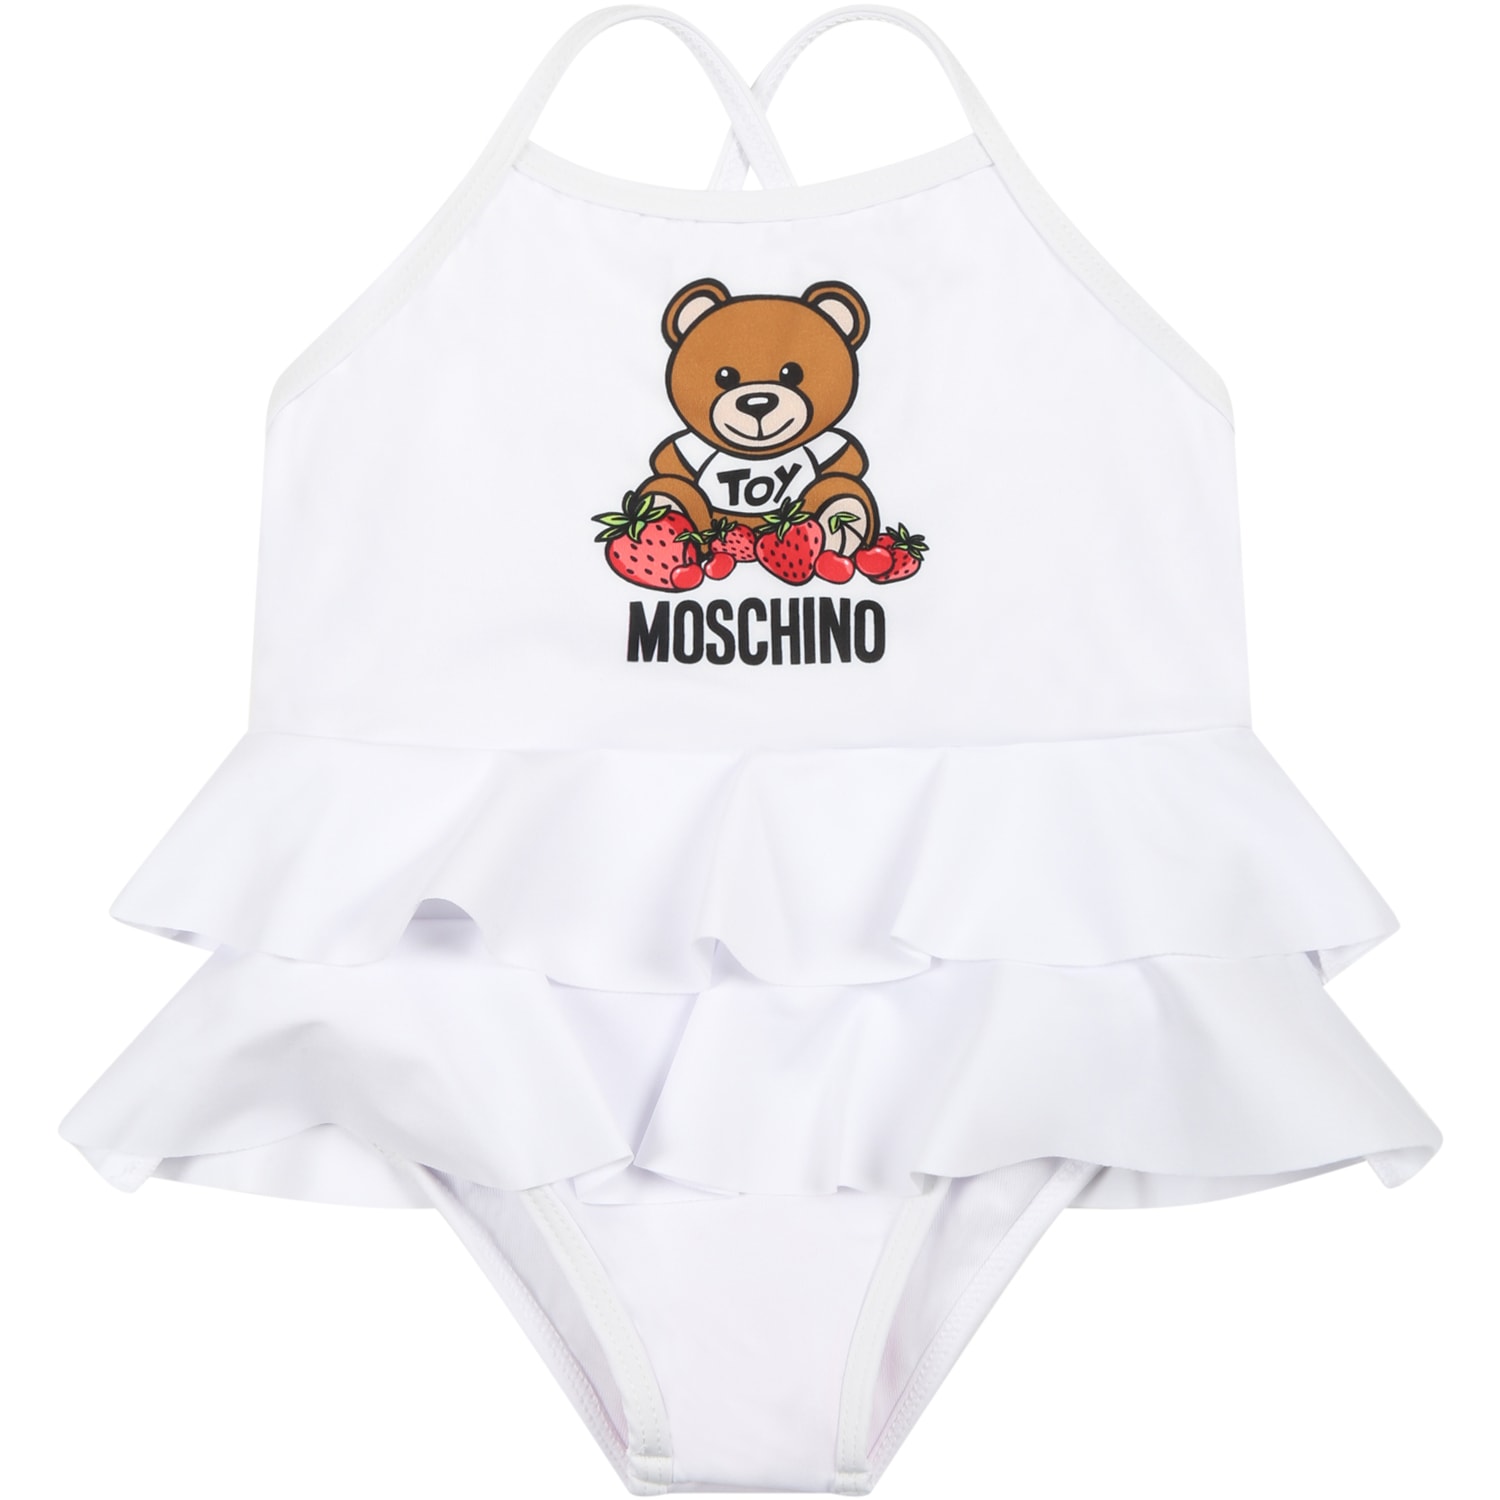 Moschino White Swimsuit For Baby Girl With Teddy Bear